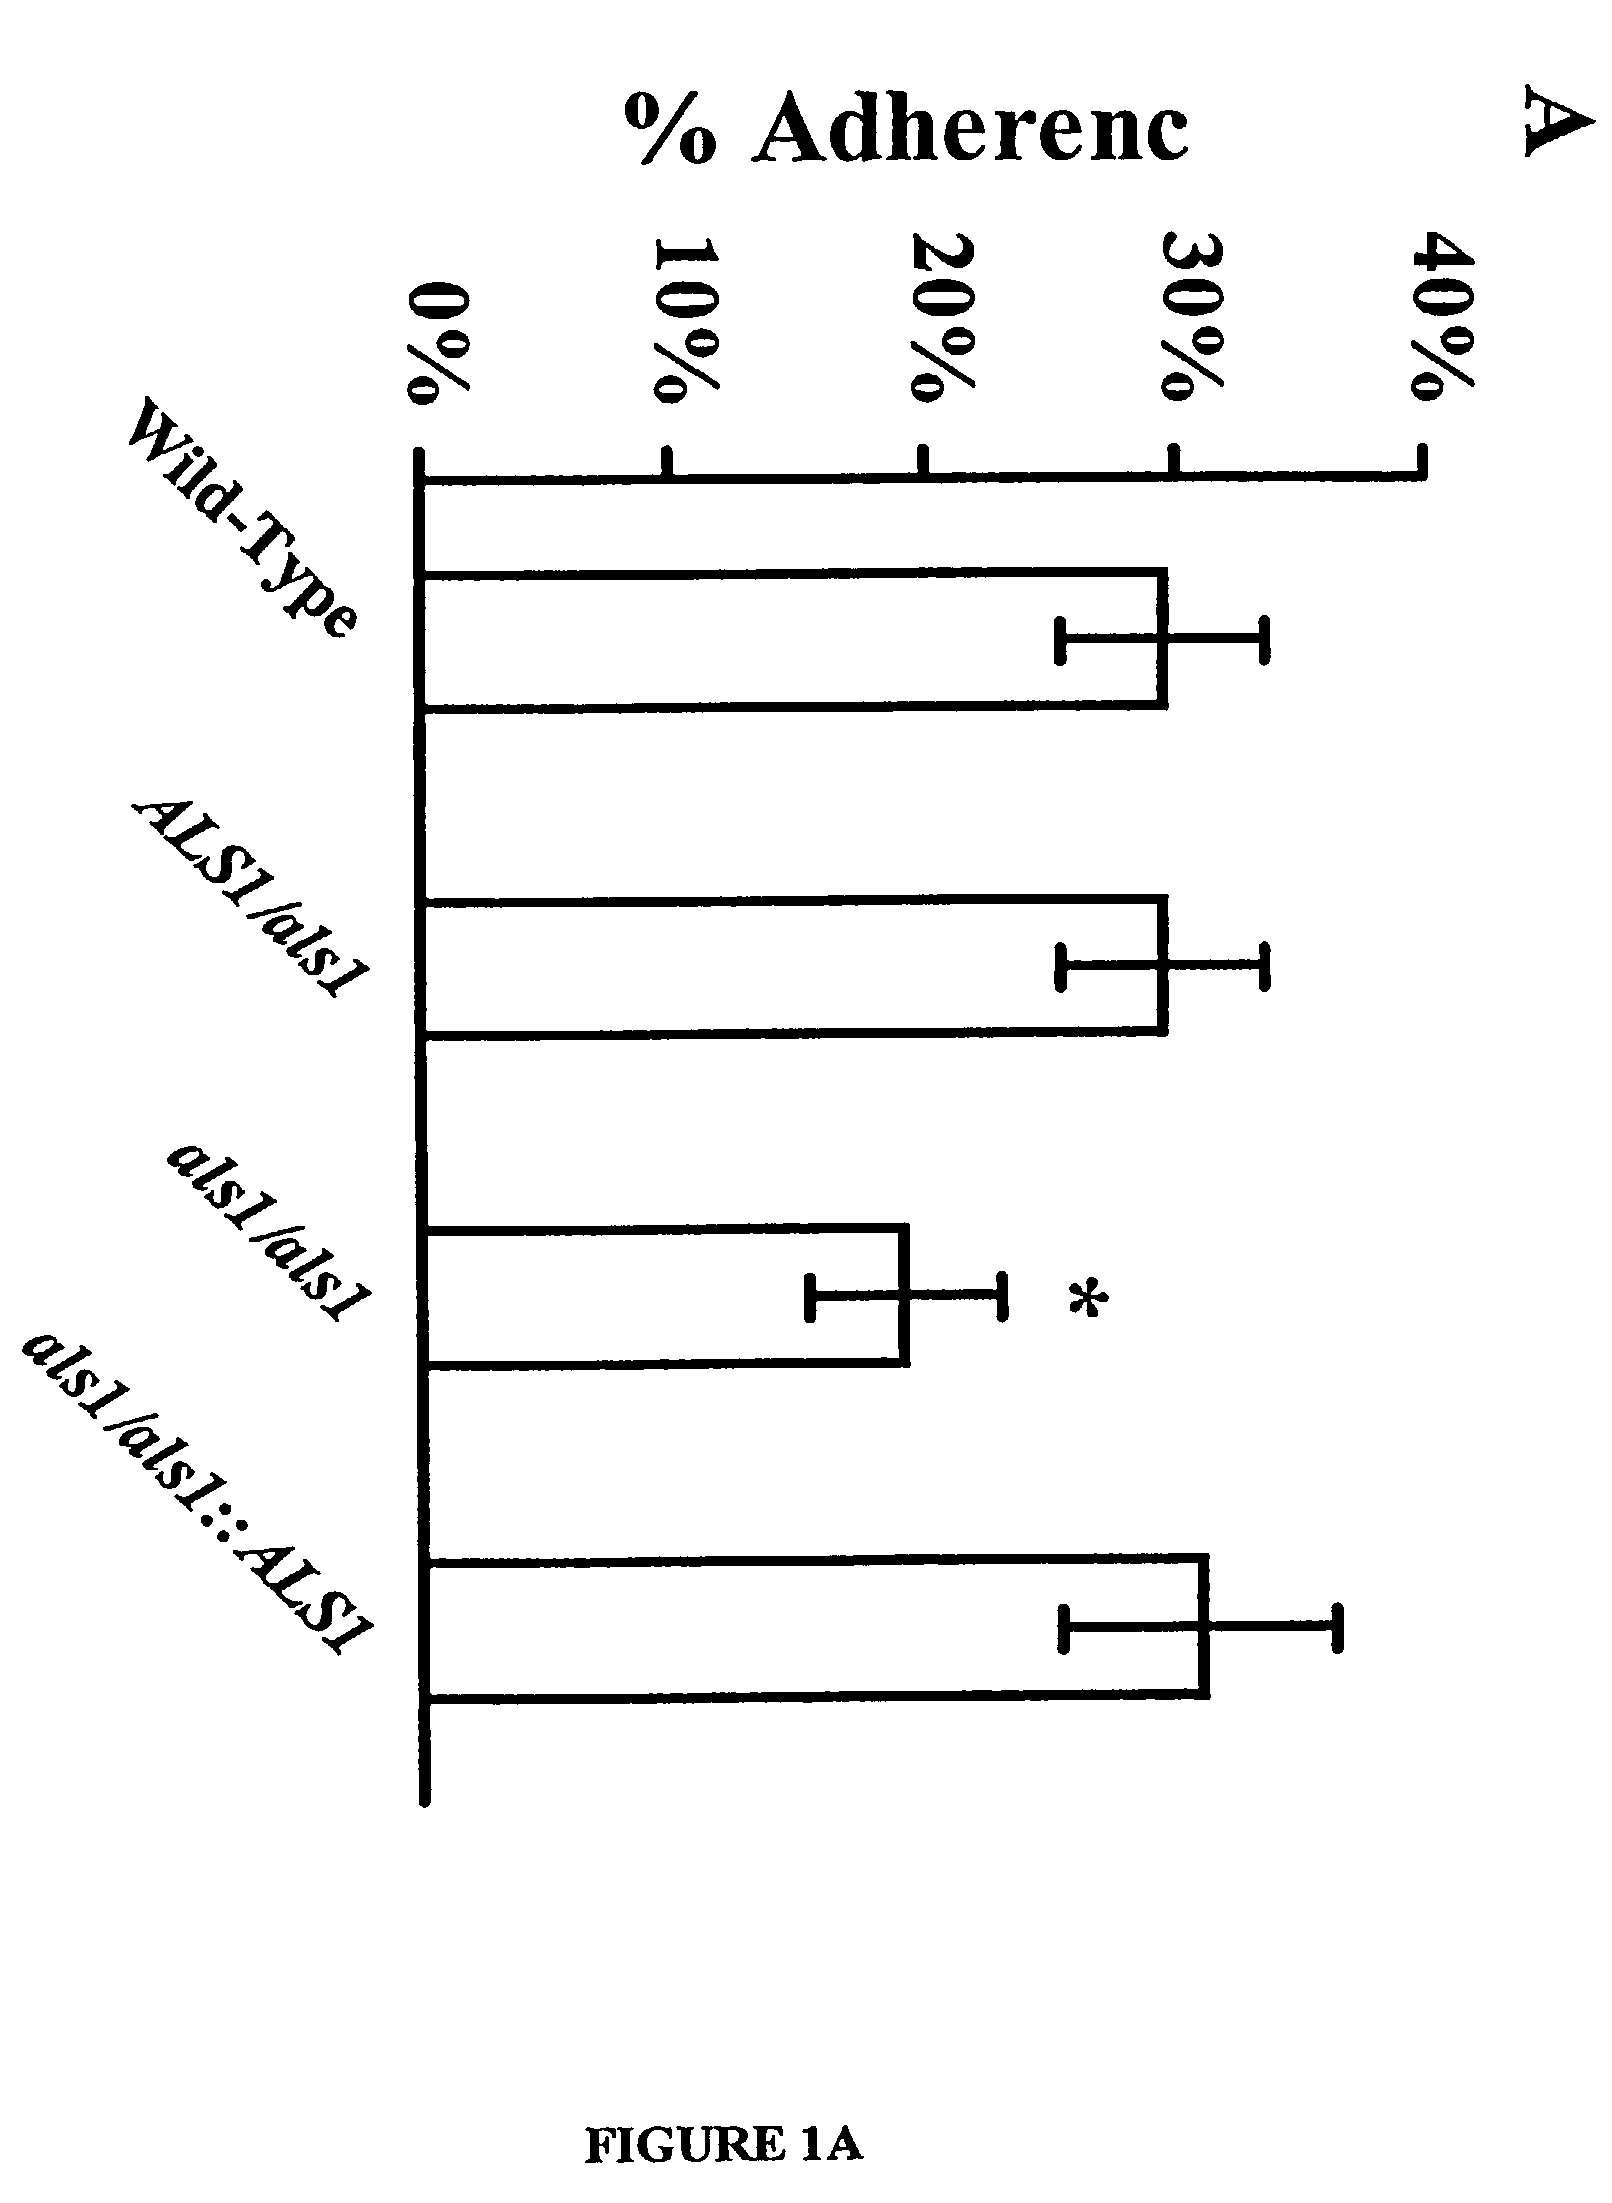 Pharmaceutical compositions and methods to vaccinate against candidiasis